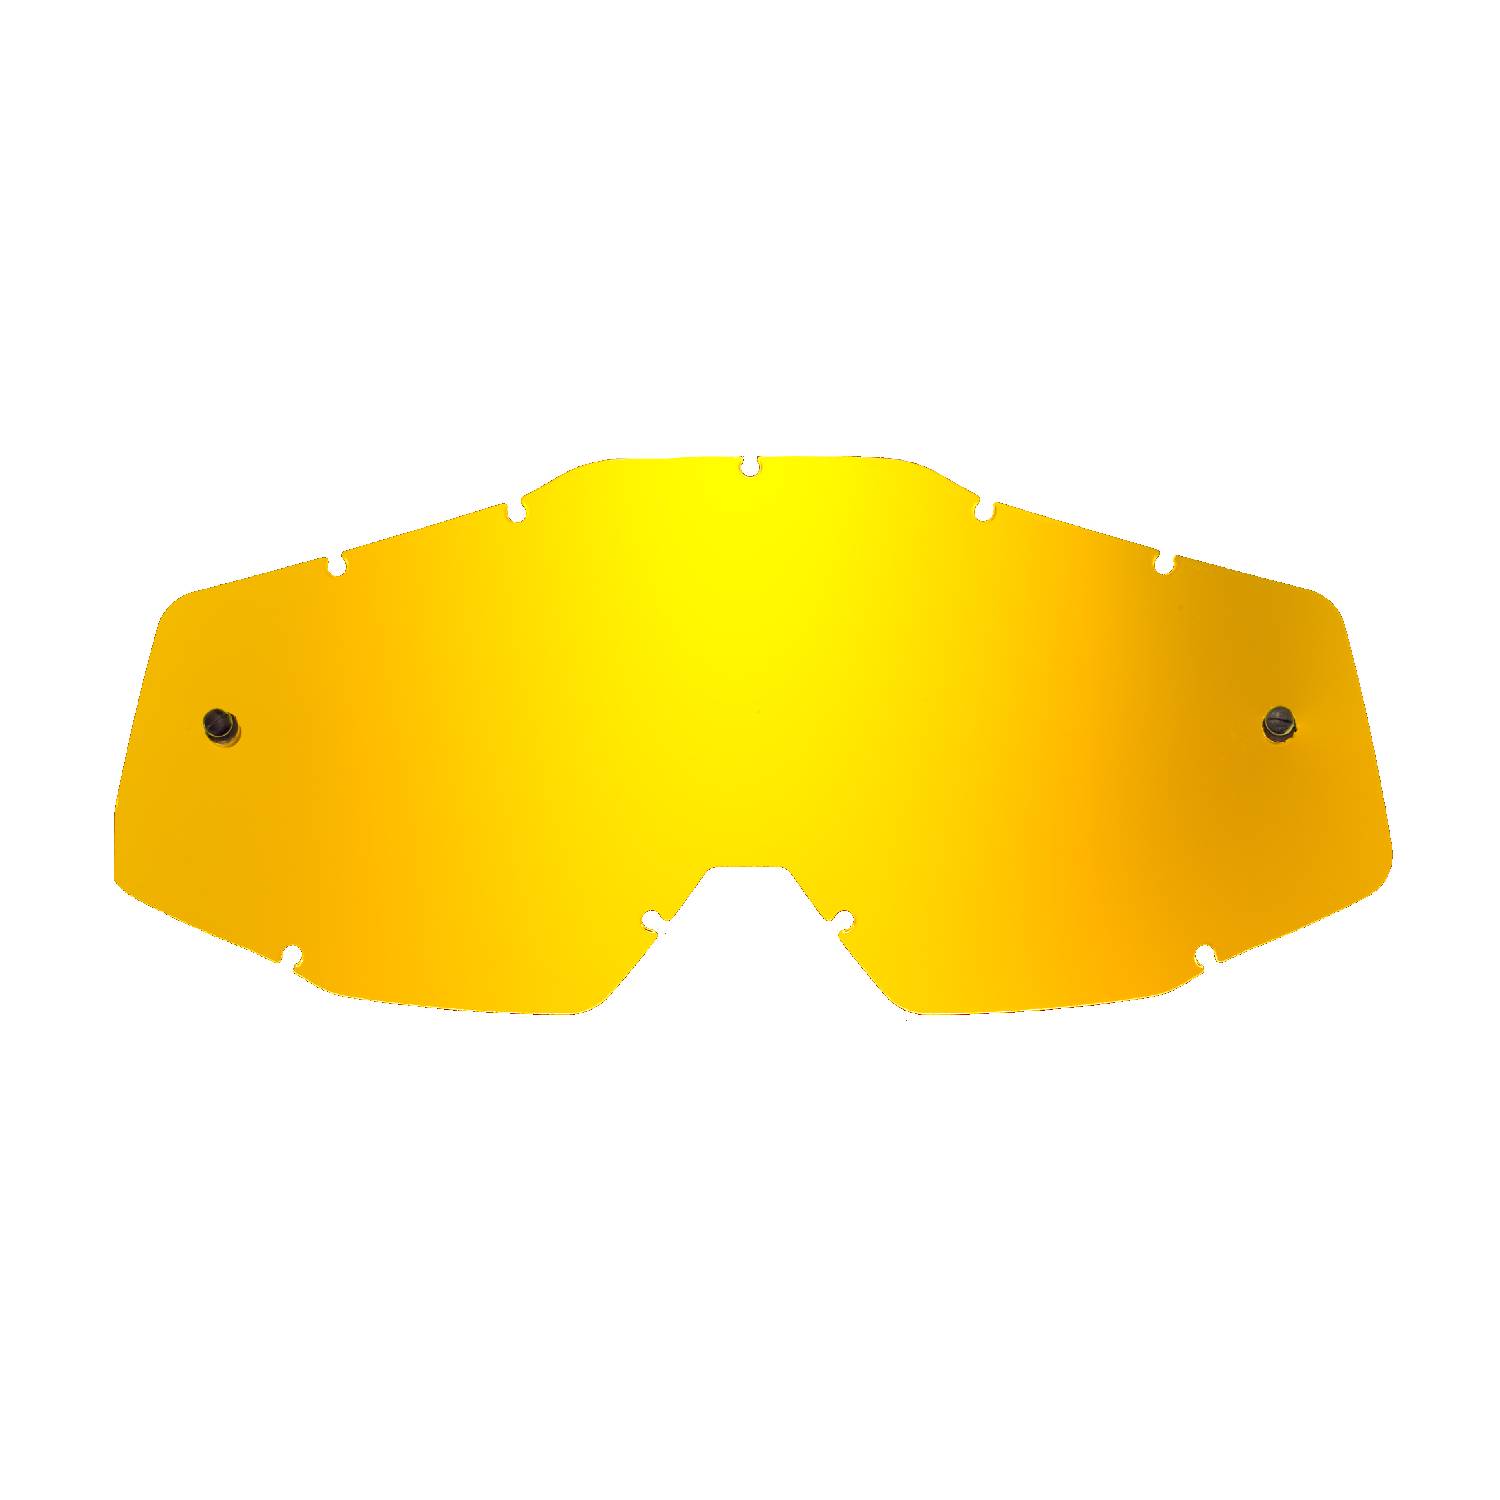 gold-toned mirrored replacement lenses for goggles compatible for FMF POWERBOMB/POWERCORE goggle